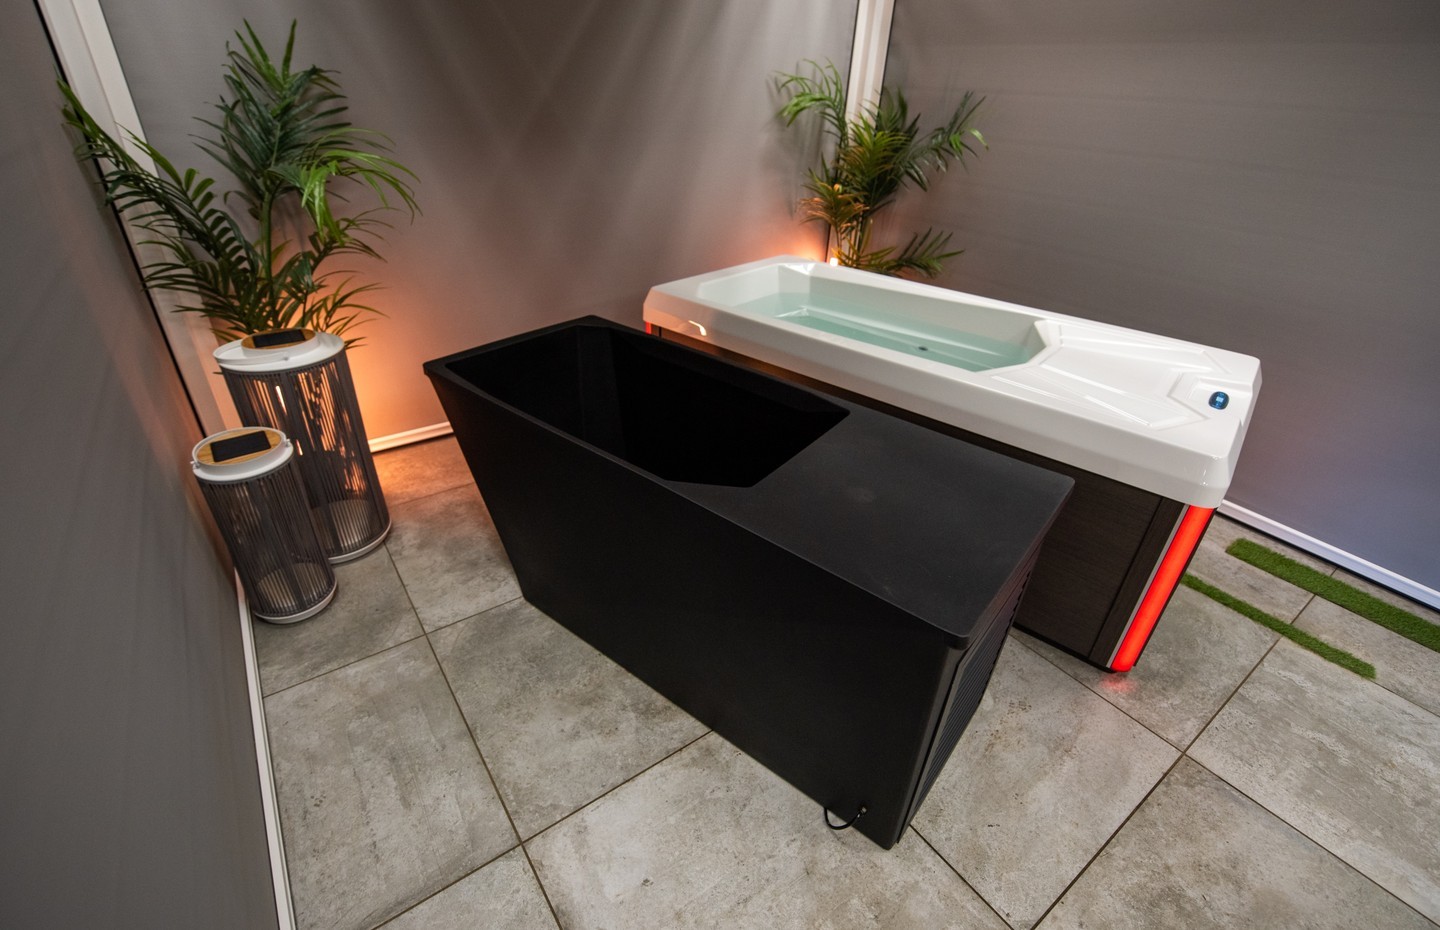 Introducing the brand new Chill Tubs Lite. Now available to pre-order on our website        The Chill Tub Lite has been built lighter  hence its name and more durable with an environmentally friendly process and design in mind. Making it our most portable ice bath of the range.   With its sleek and unique design  it will look stylish indoors or outdoors.   Start your ice bath   cold plunge journey with the Chill Tubs Lite.  Set the temperature as low as 3 degrees  37  F . No ice is required. Insulated cover provided free of charge.  If you are new to cold water therapy the Chill Tubs Lite is for you.   Shop now on our website. LINK IN BIO        #chilltub #chilltubs #chilltublite #preorder #newproduct #coldwater #coldwatertherapy #coldwaterimmersion #wimhof #wimhofmethod